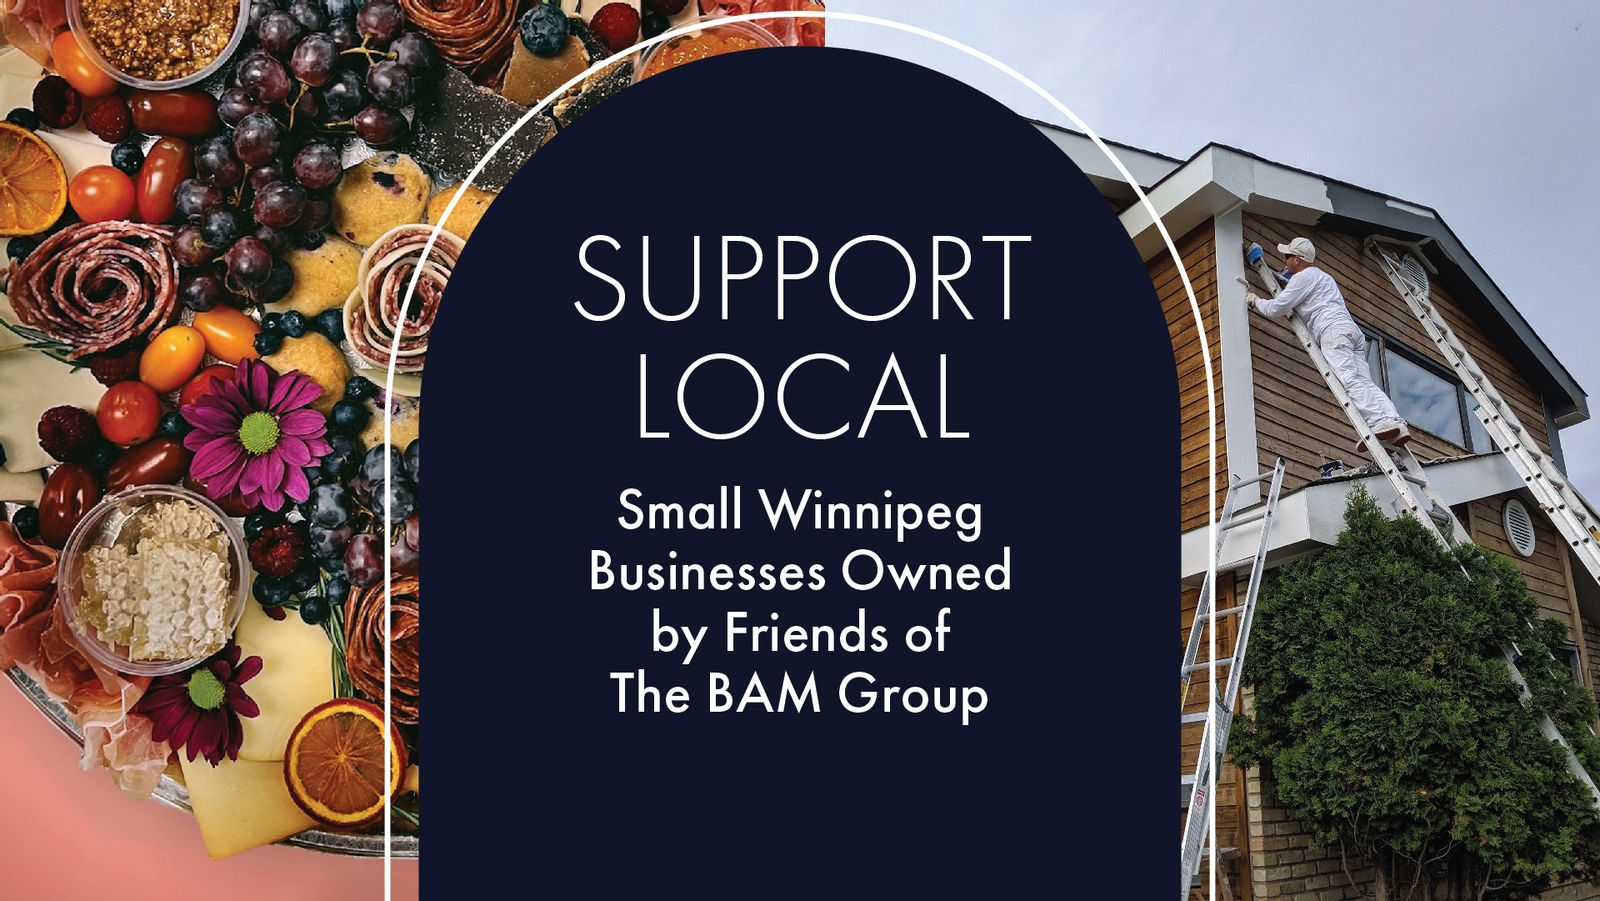 Support Local! Small Winnipeg Based Businesses to Check Out